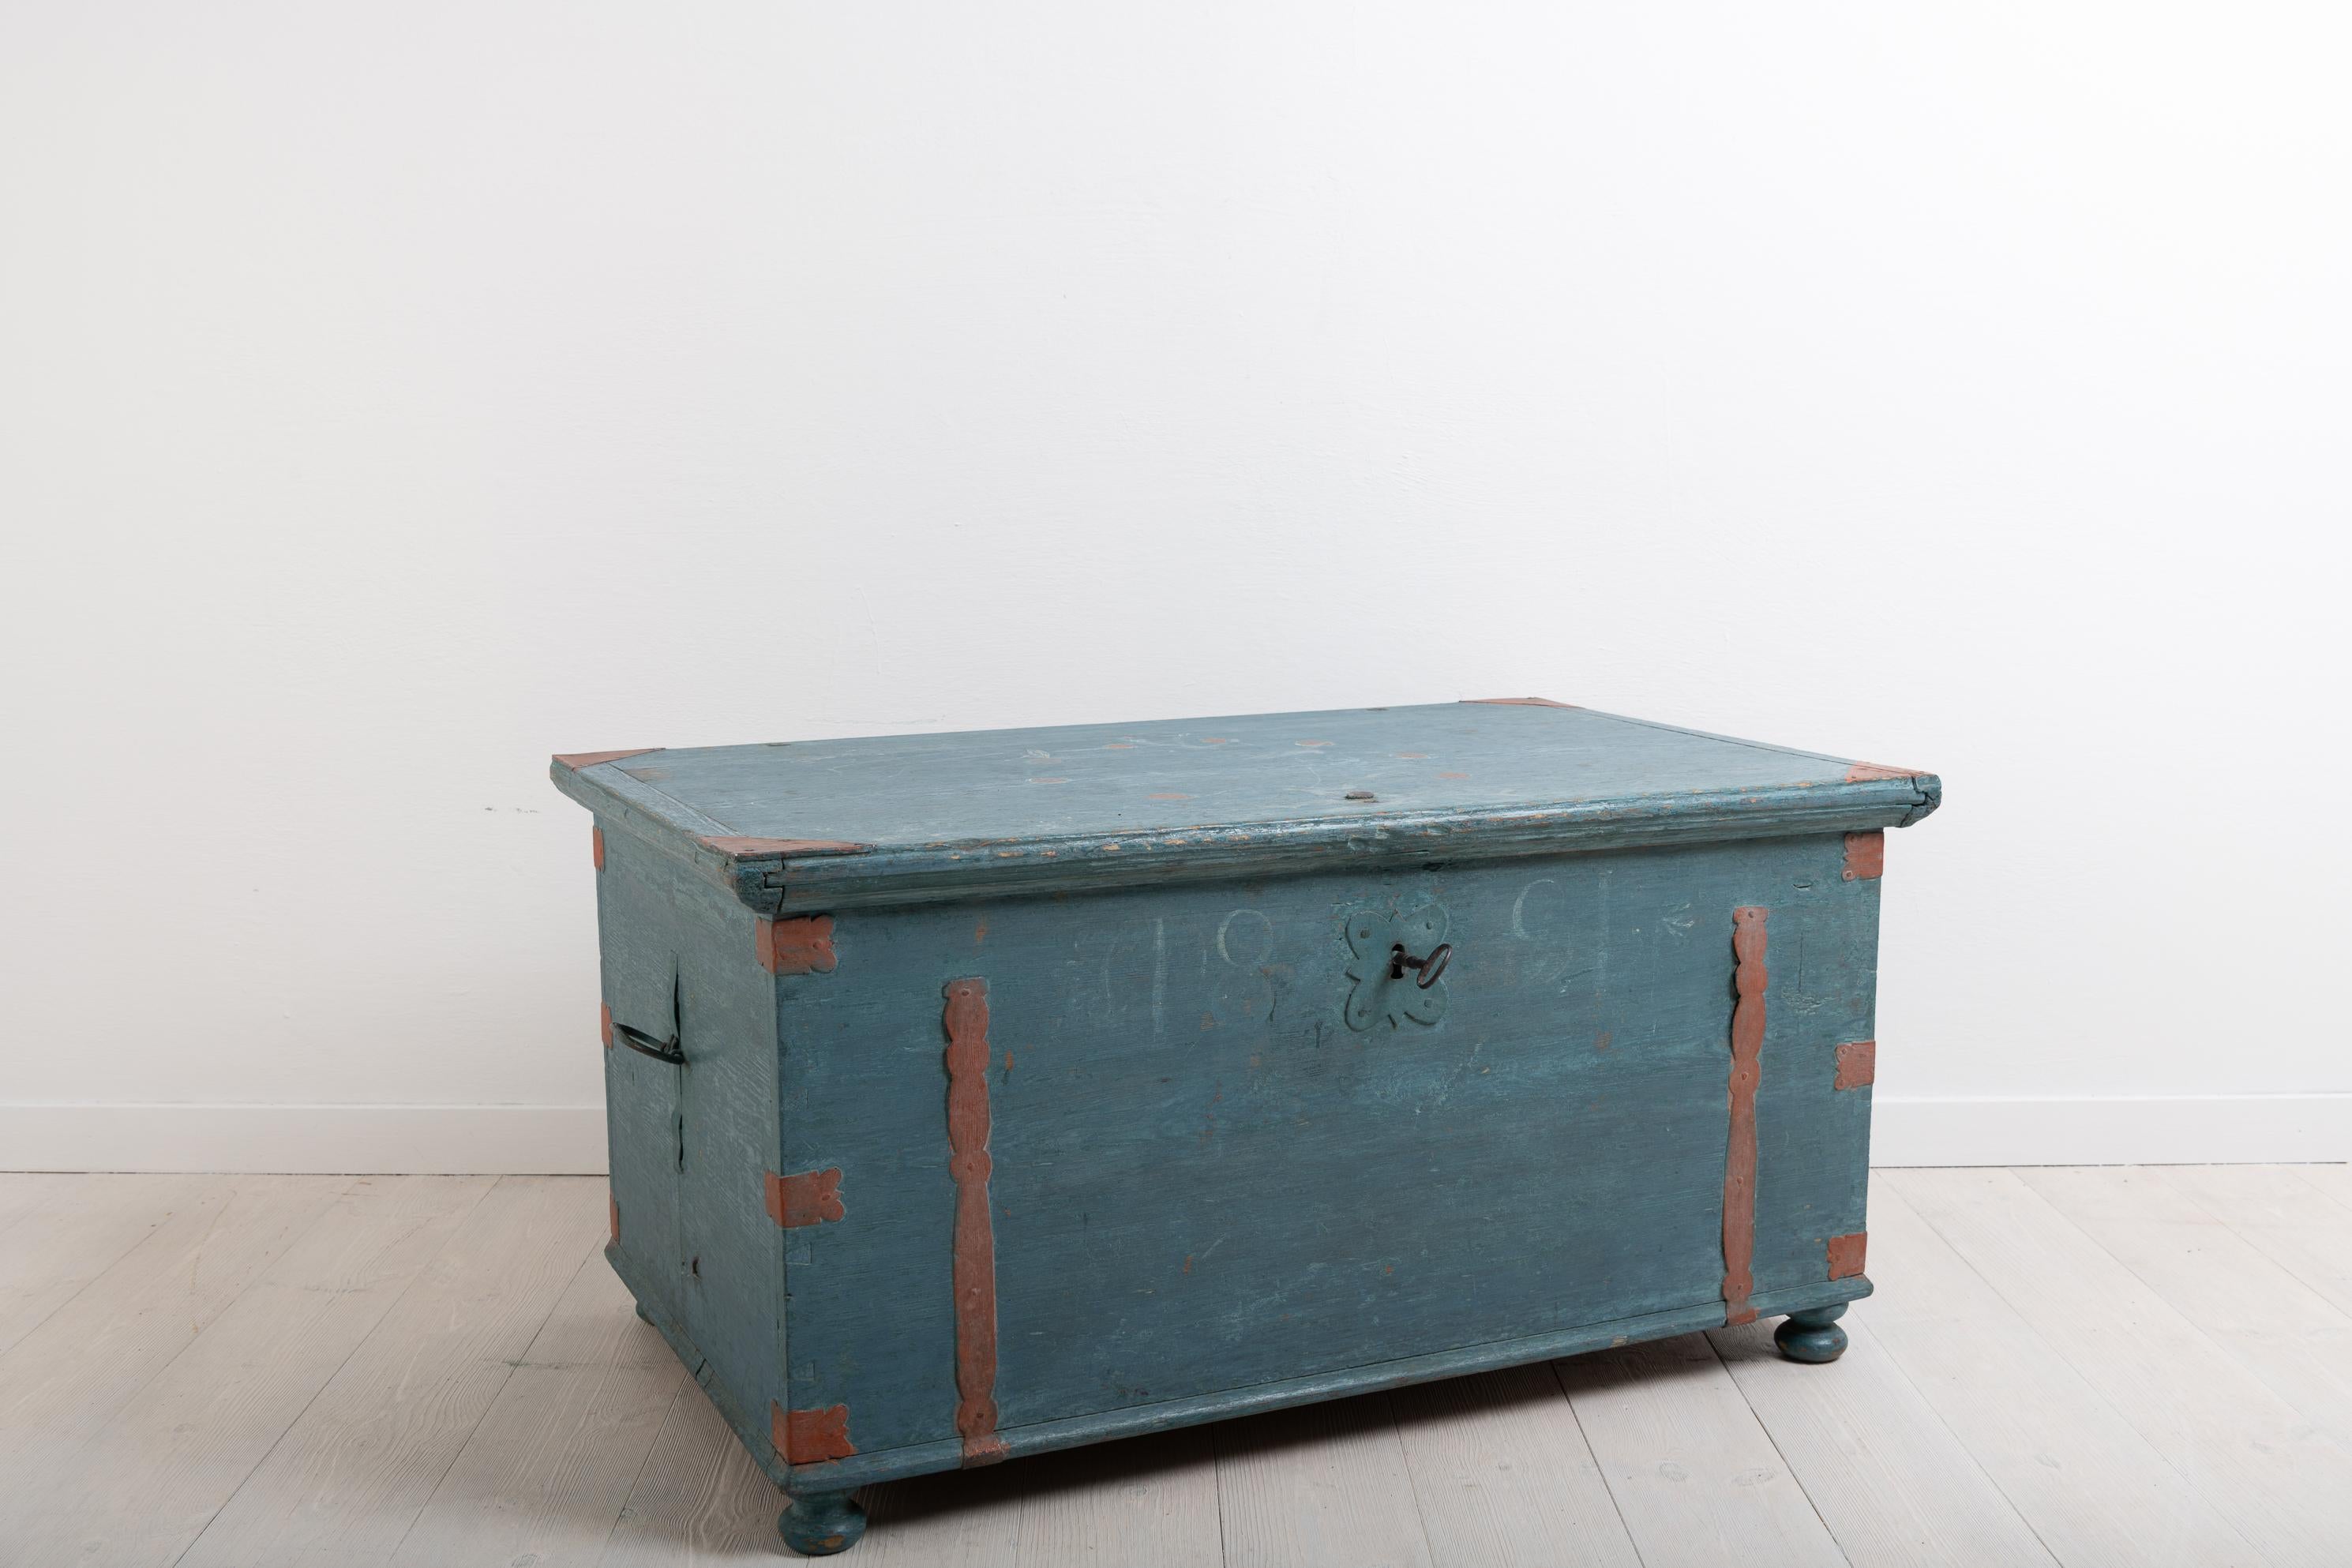 Folk art chest with original blue paint. There are traces of decorative paint and dating. Manufactured in northern Sweden, circa 1840-1860. The lock and key are original and in fully functional condition.